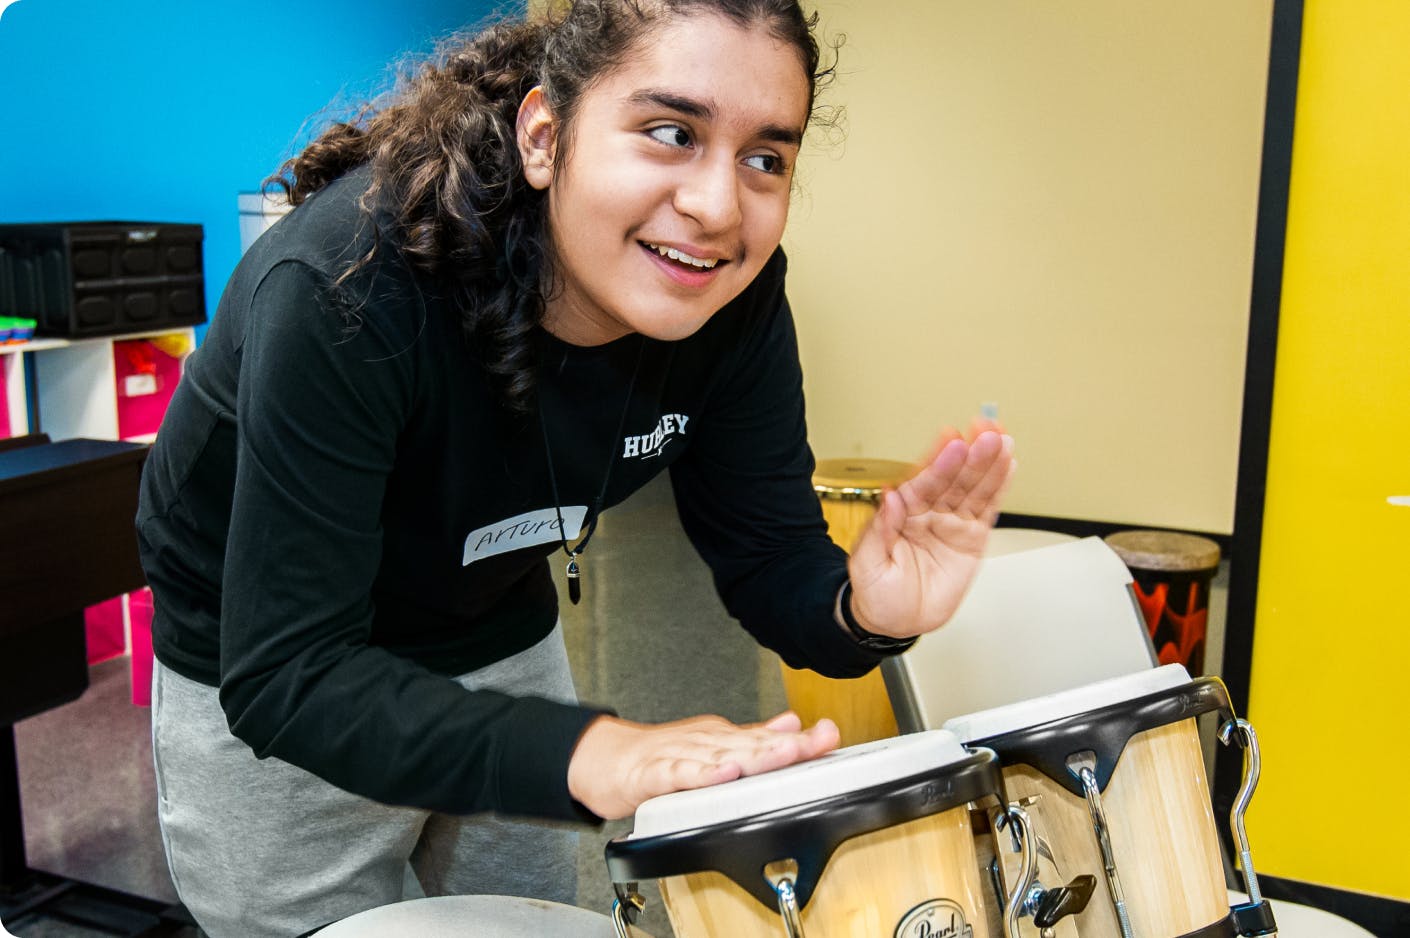 A DMF participant looks up and smiles while playing drums with their hands